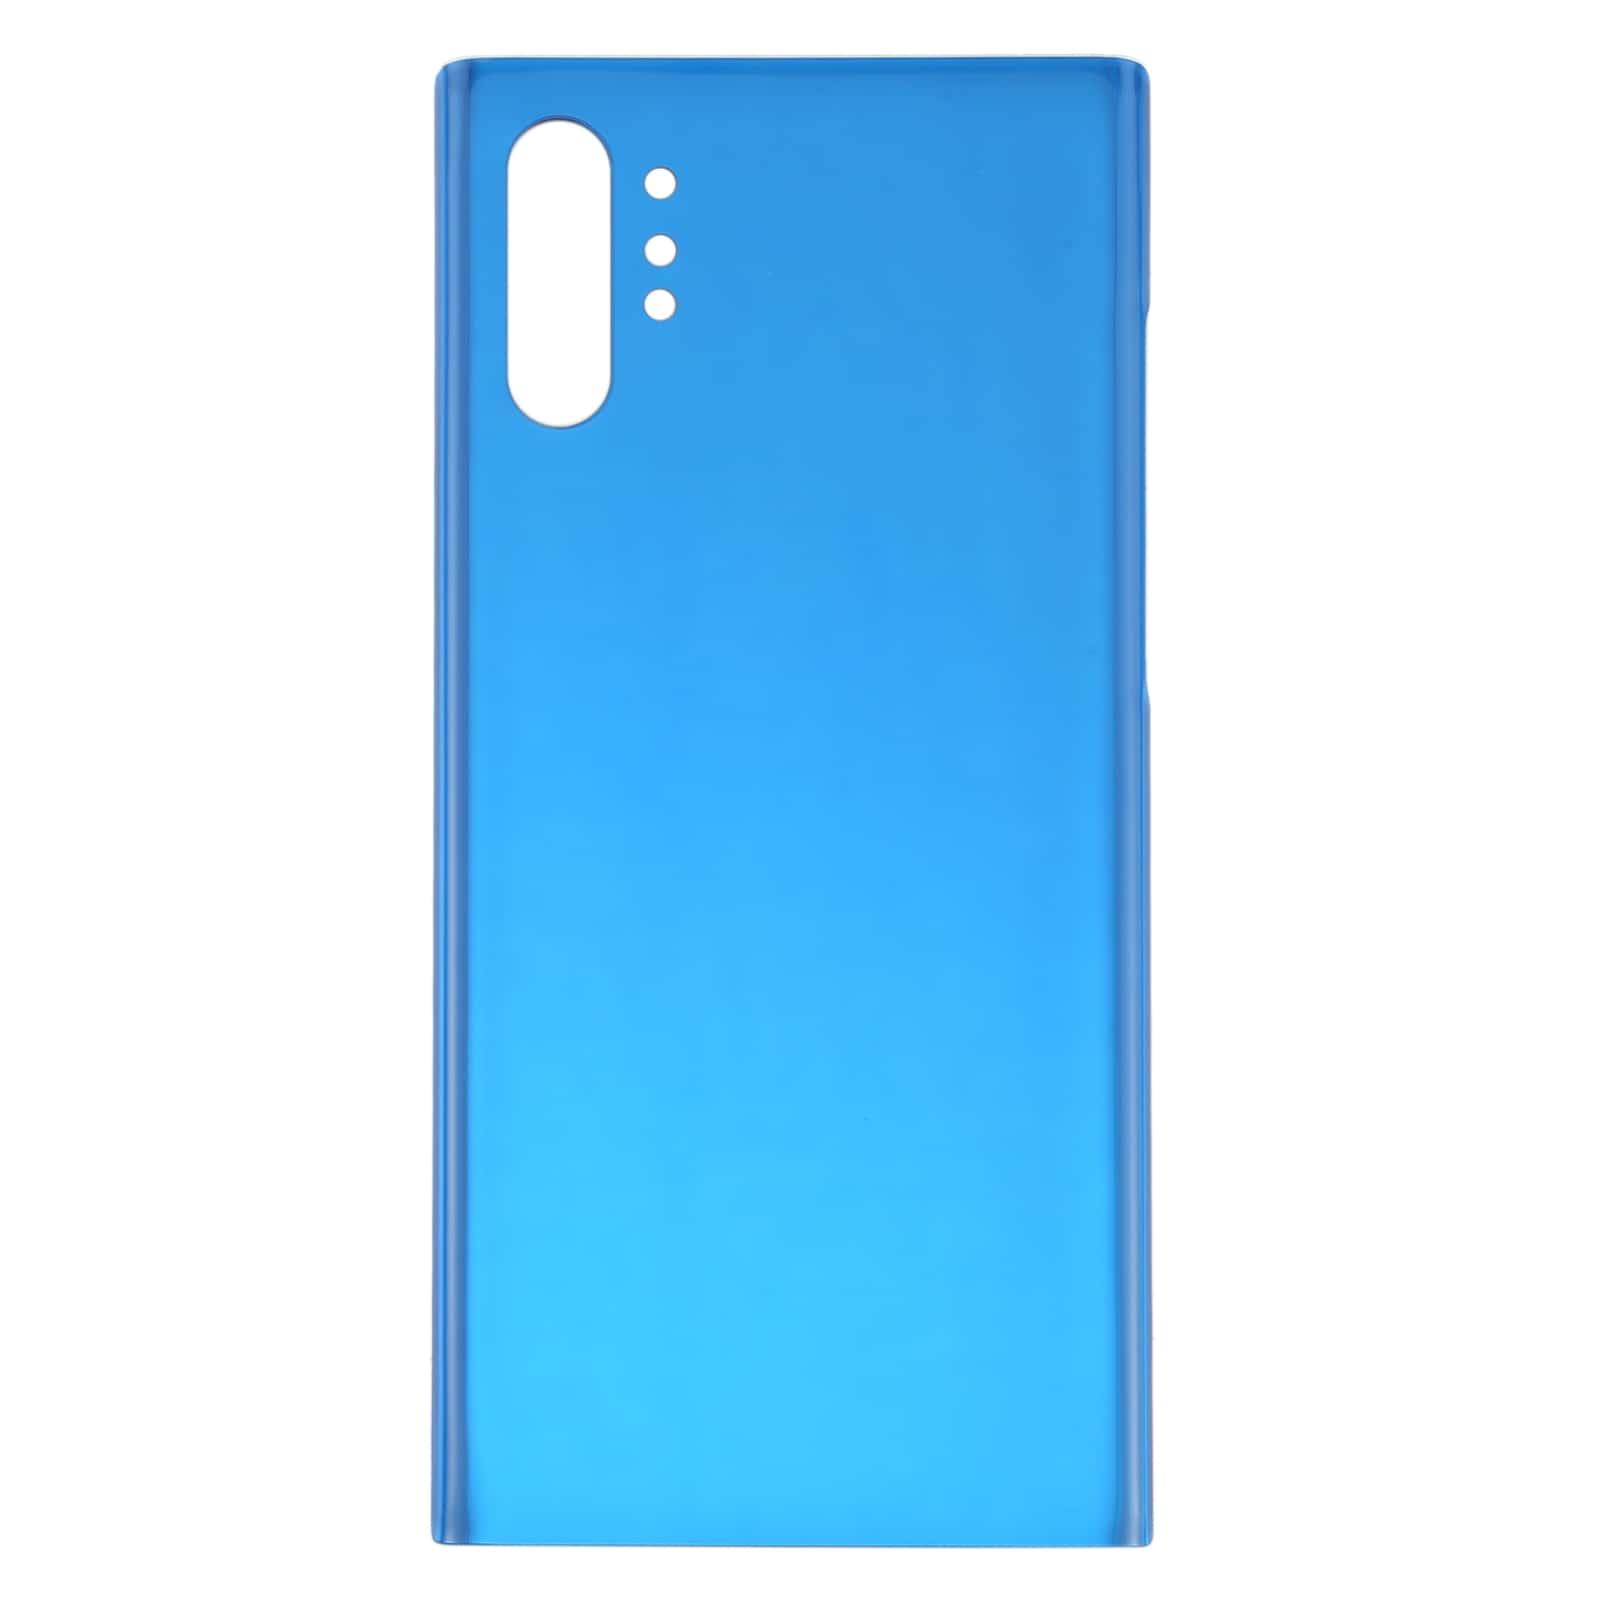 Back Glass Panel for  Samsung Galaxy Note10 Plus Blue